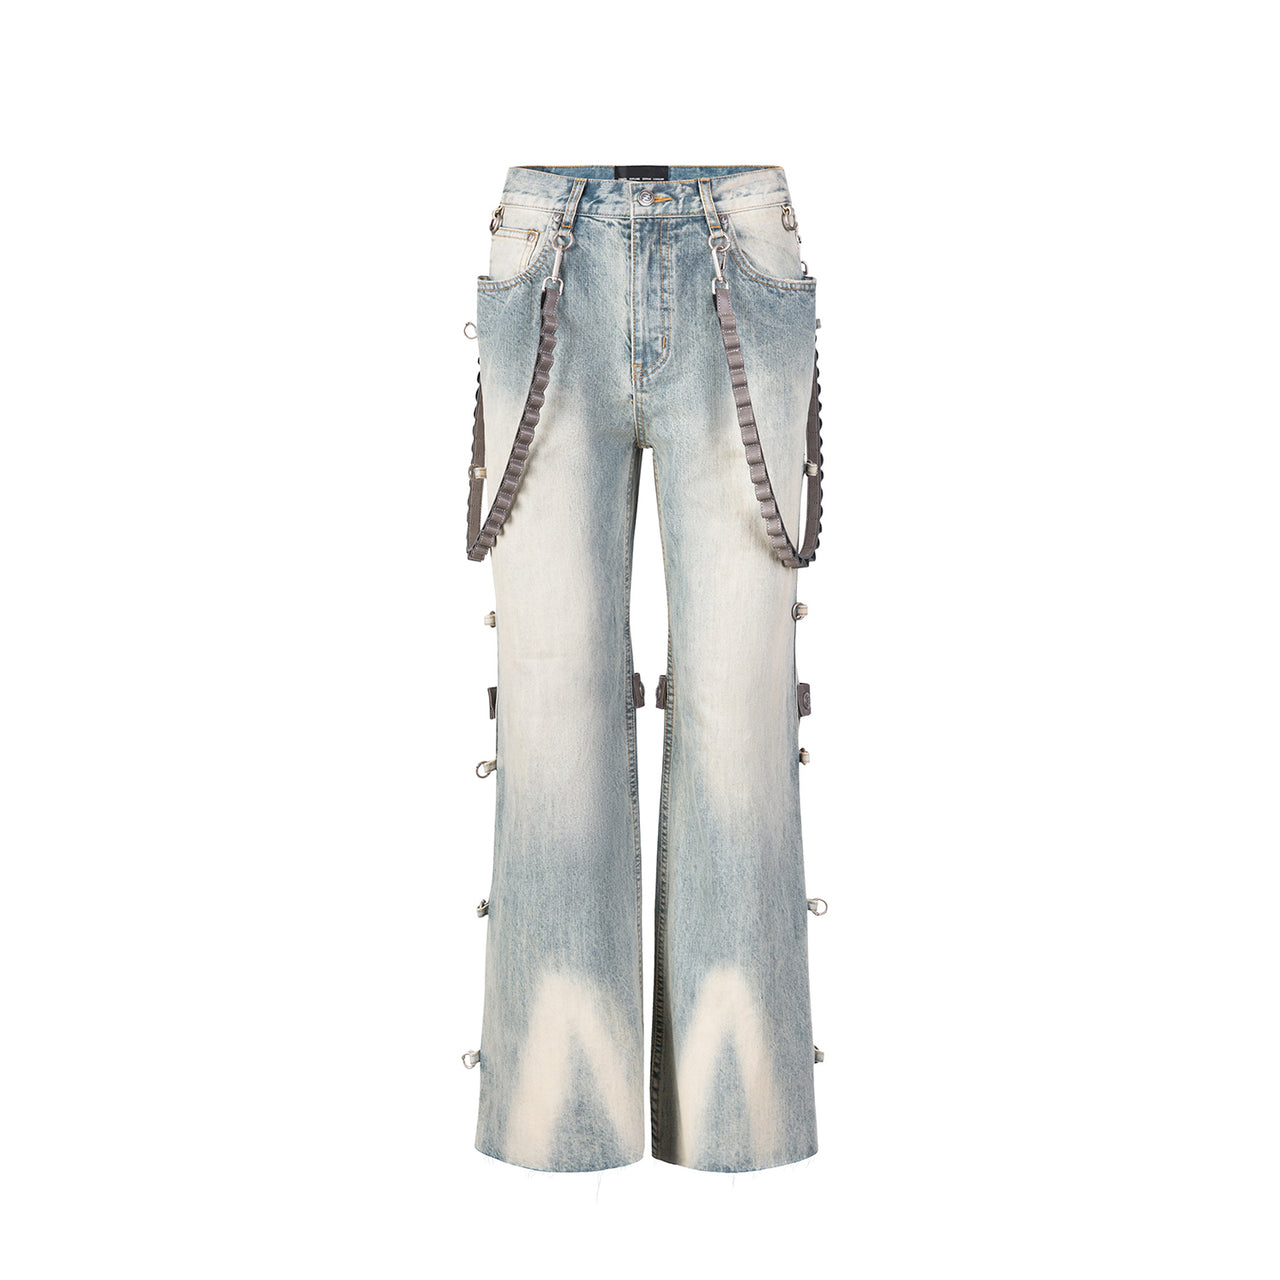 Signatured Leather Chain Jeans